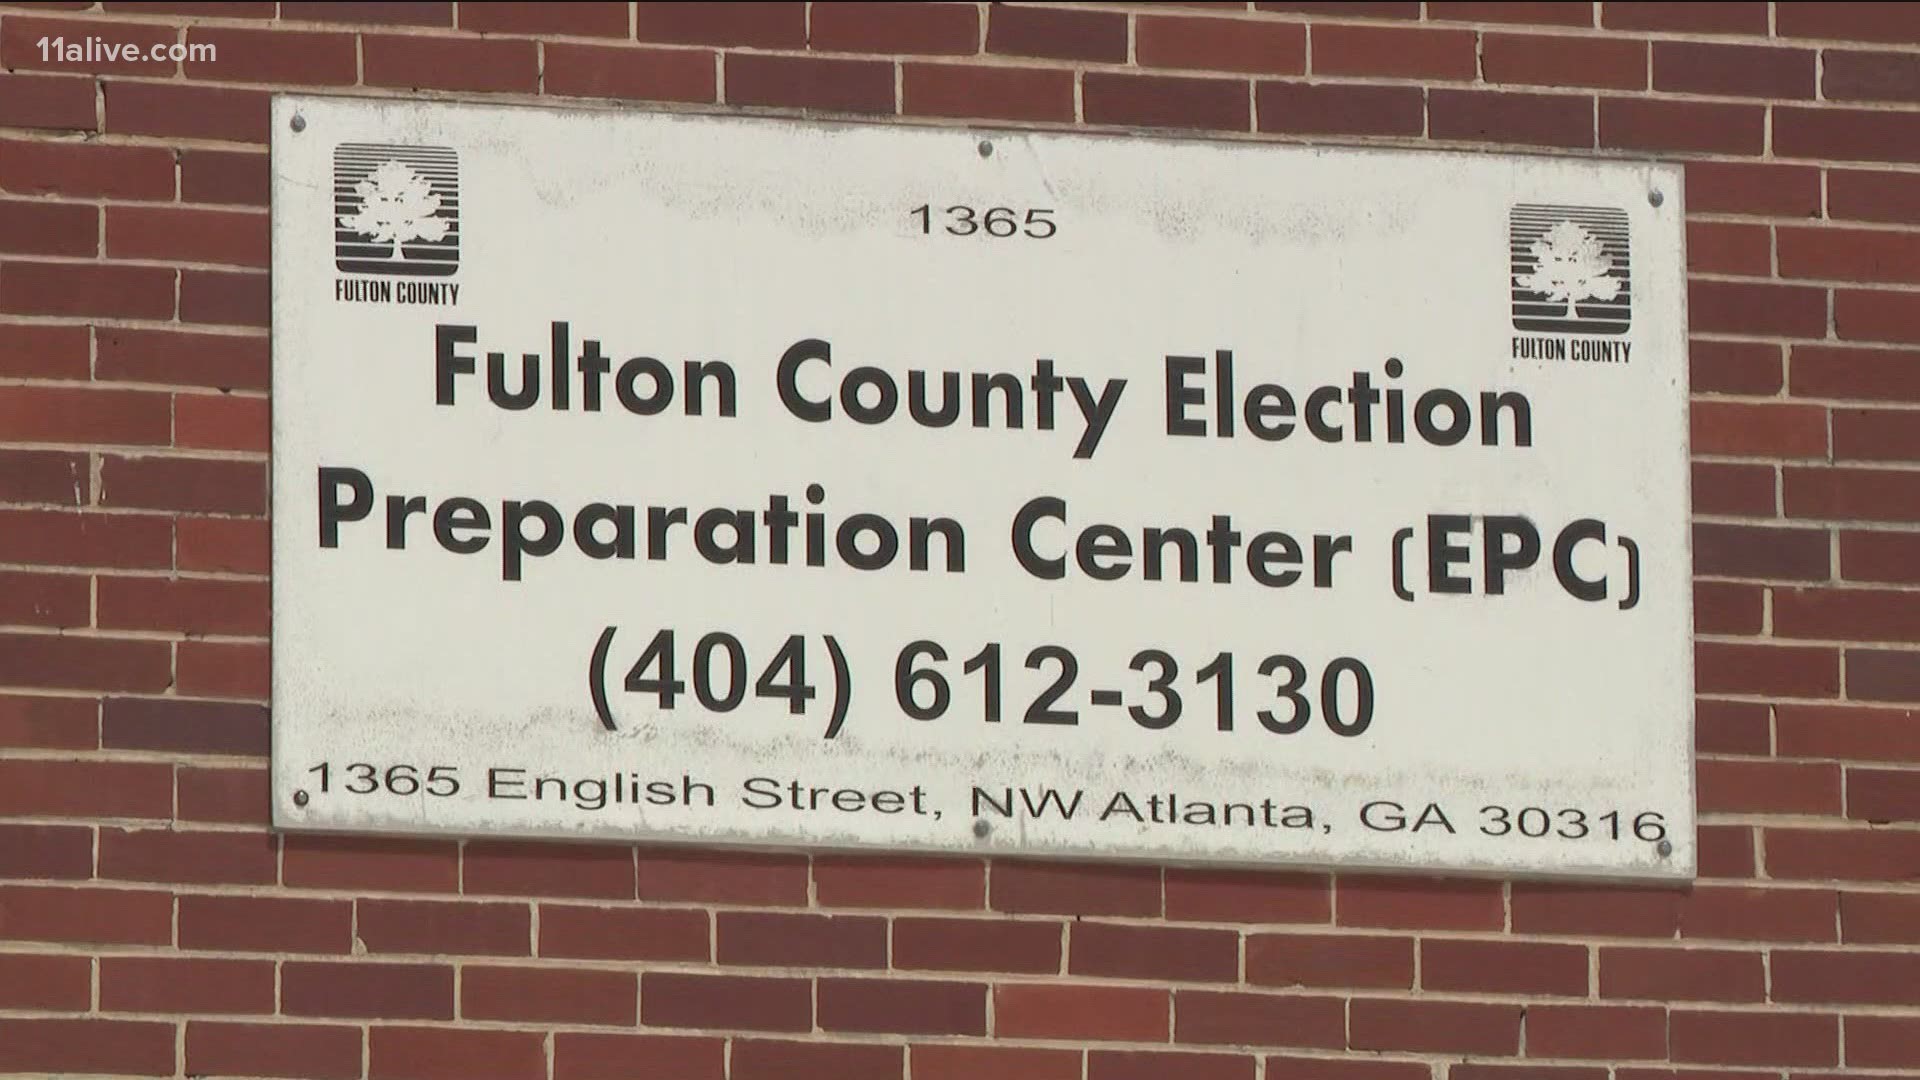 Officials said no ballots were compromised.